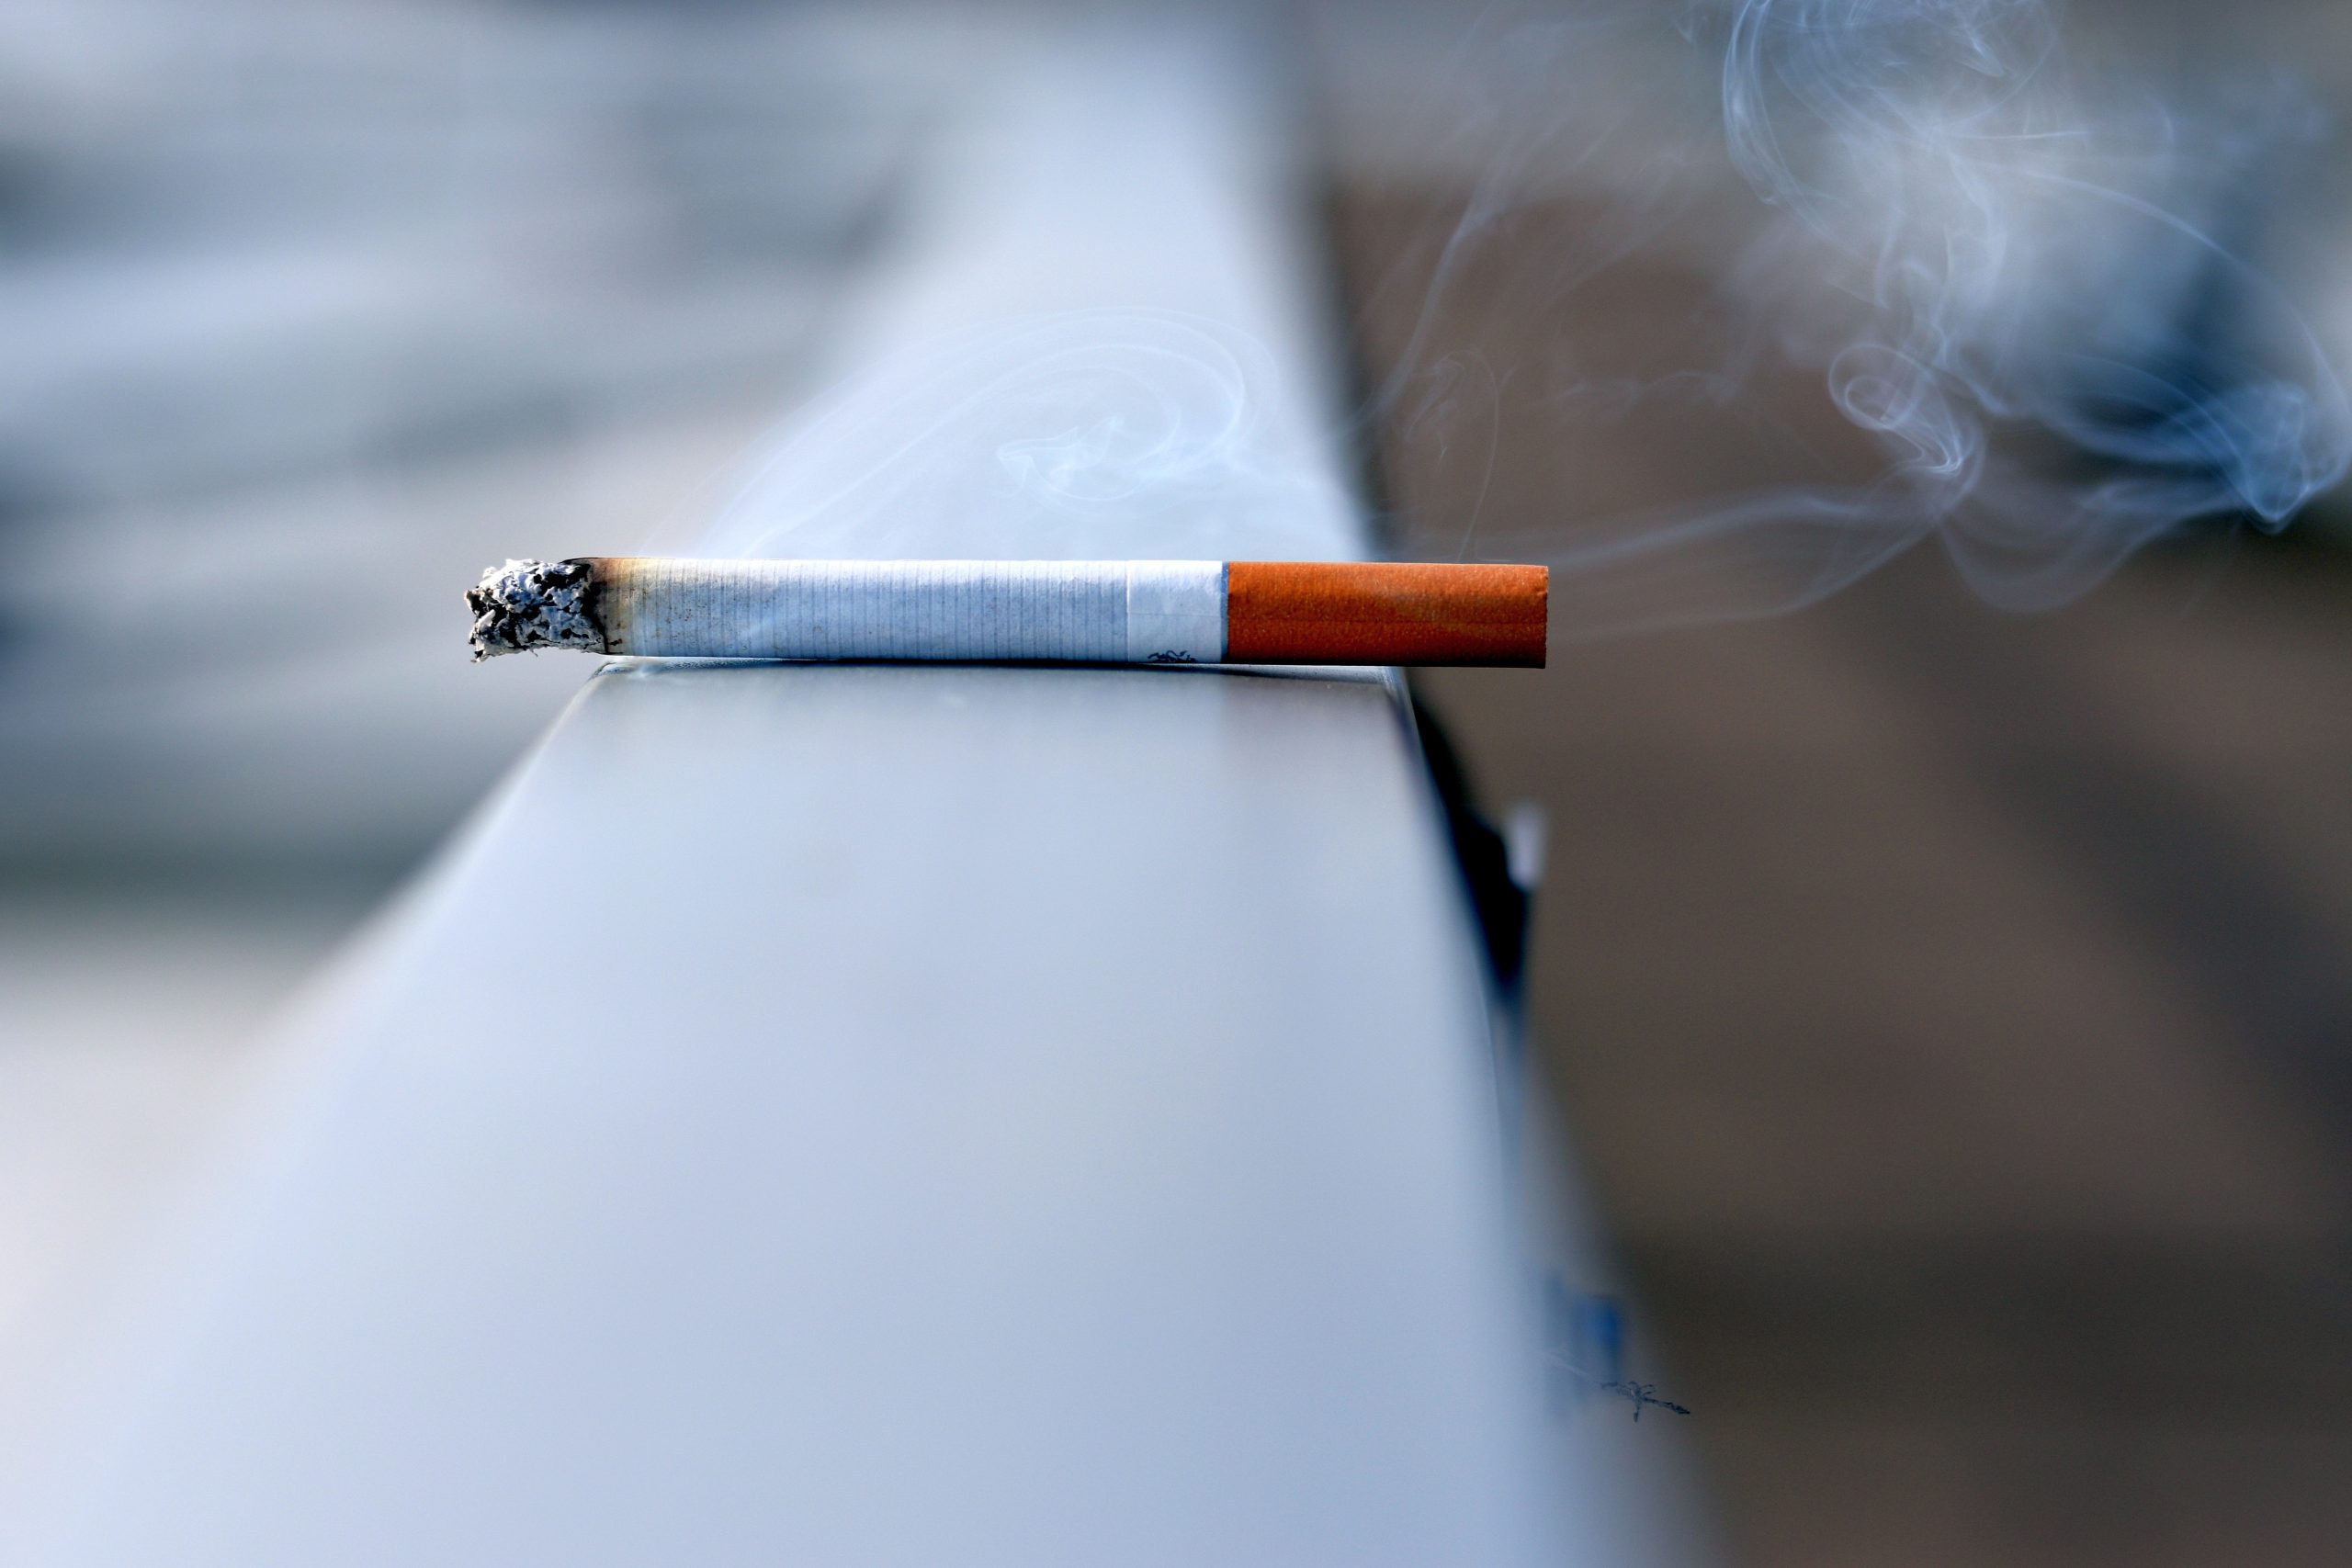 How long can nicotine stay in your blood?